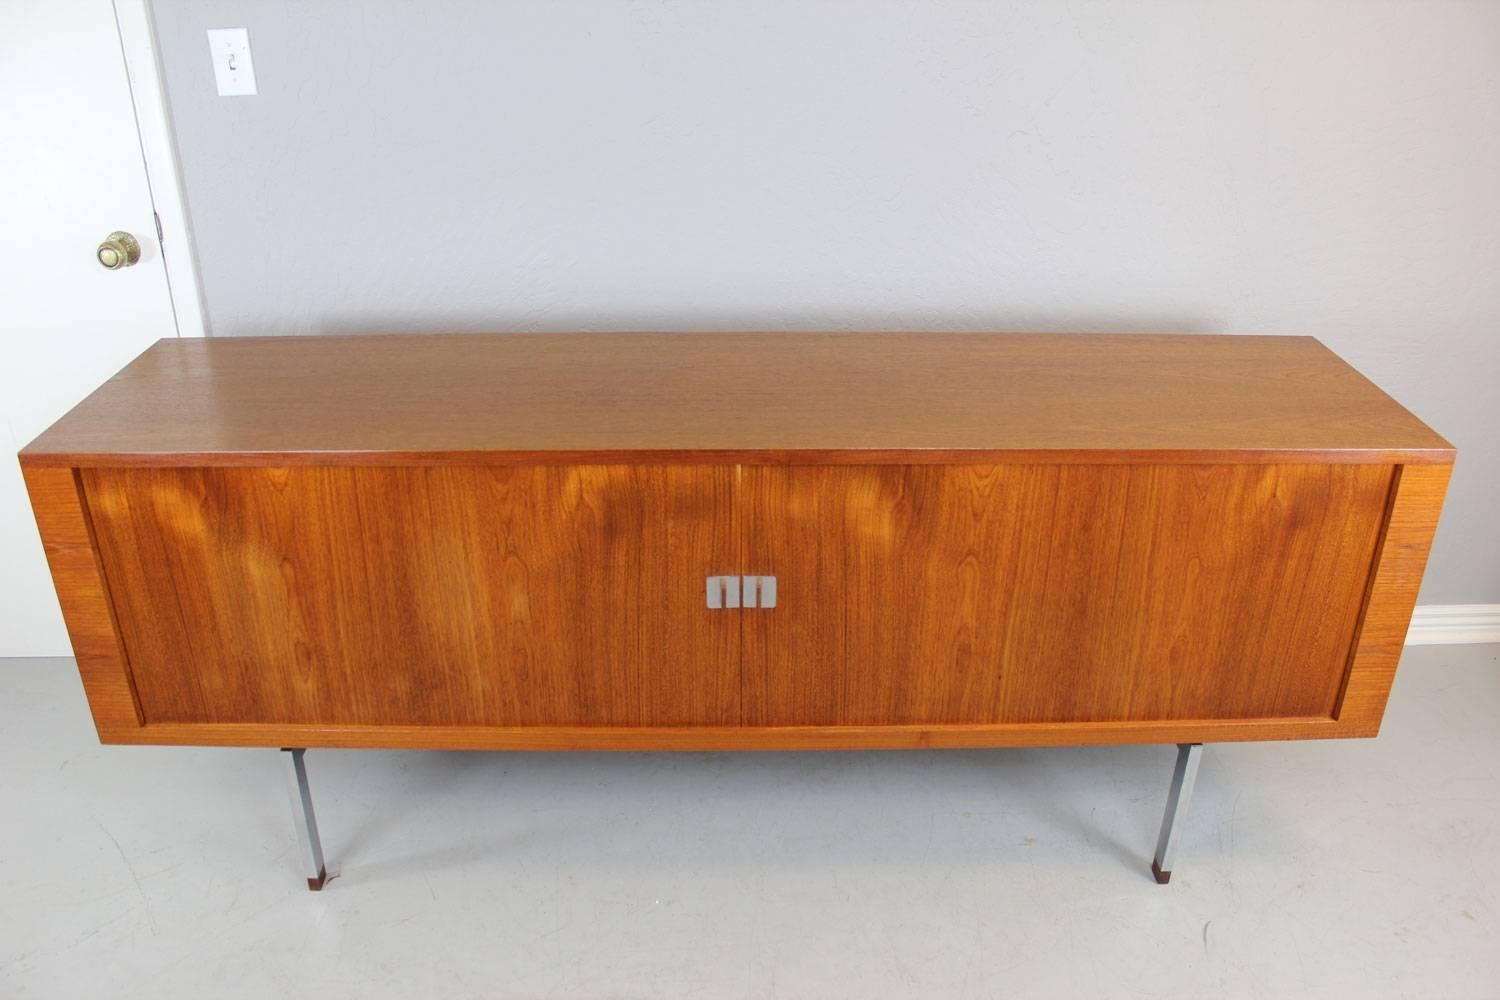 Teak and steel President credenza by Hans Wegner for Ry Mobler. Note the exceptional 3-D teak shadow casting effect on the front tambour doors.  The Tambour doors conceal 3 non-oiled original compartments (the way Ry Mobler produced these units) one